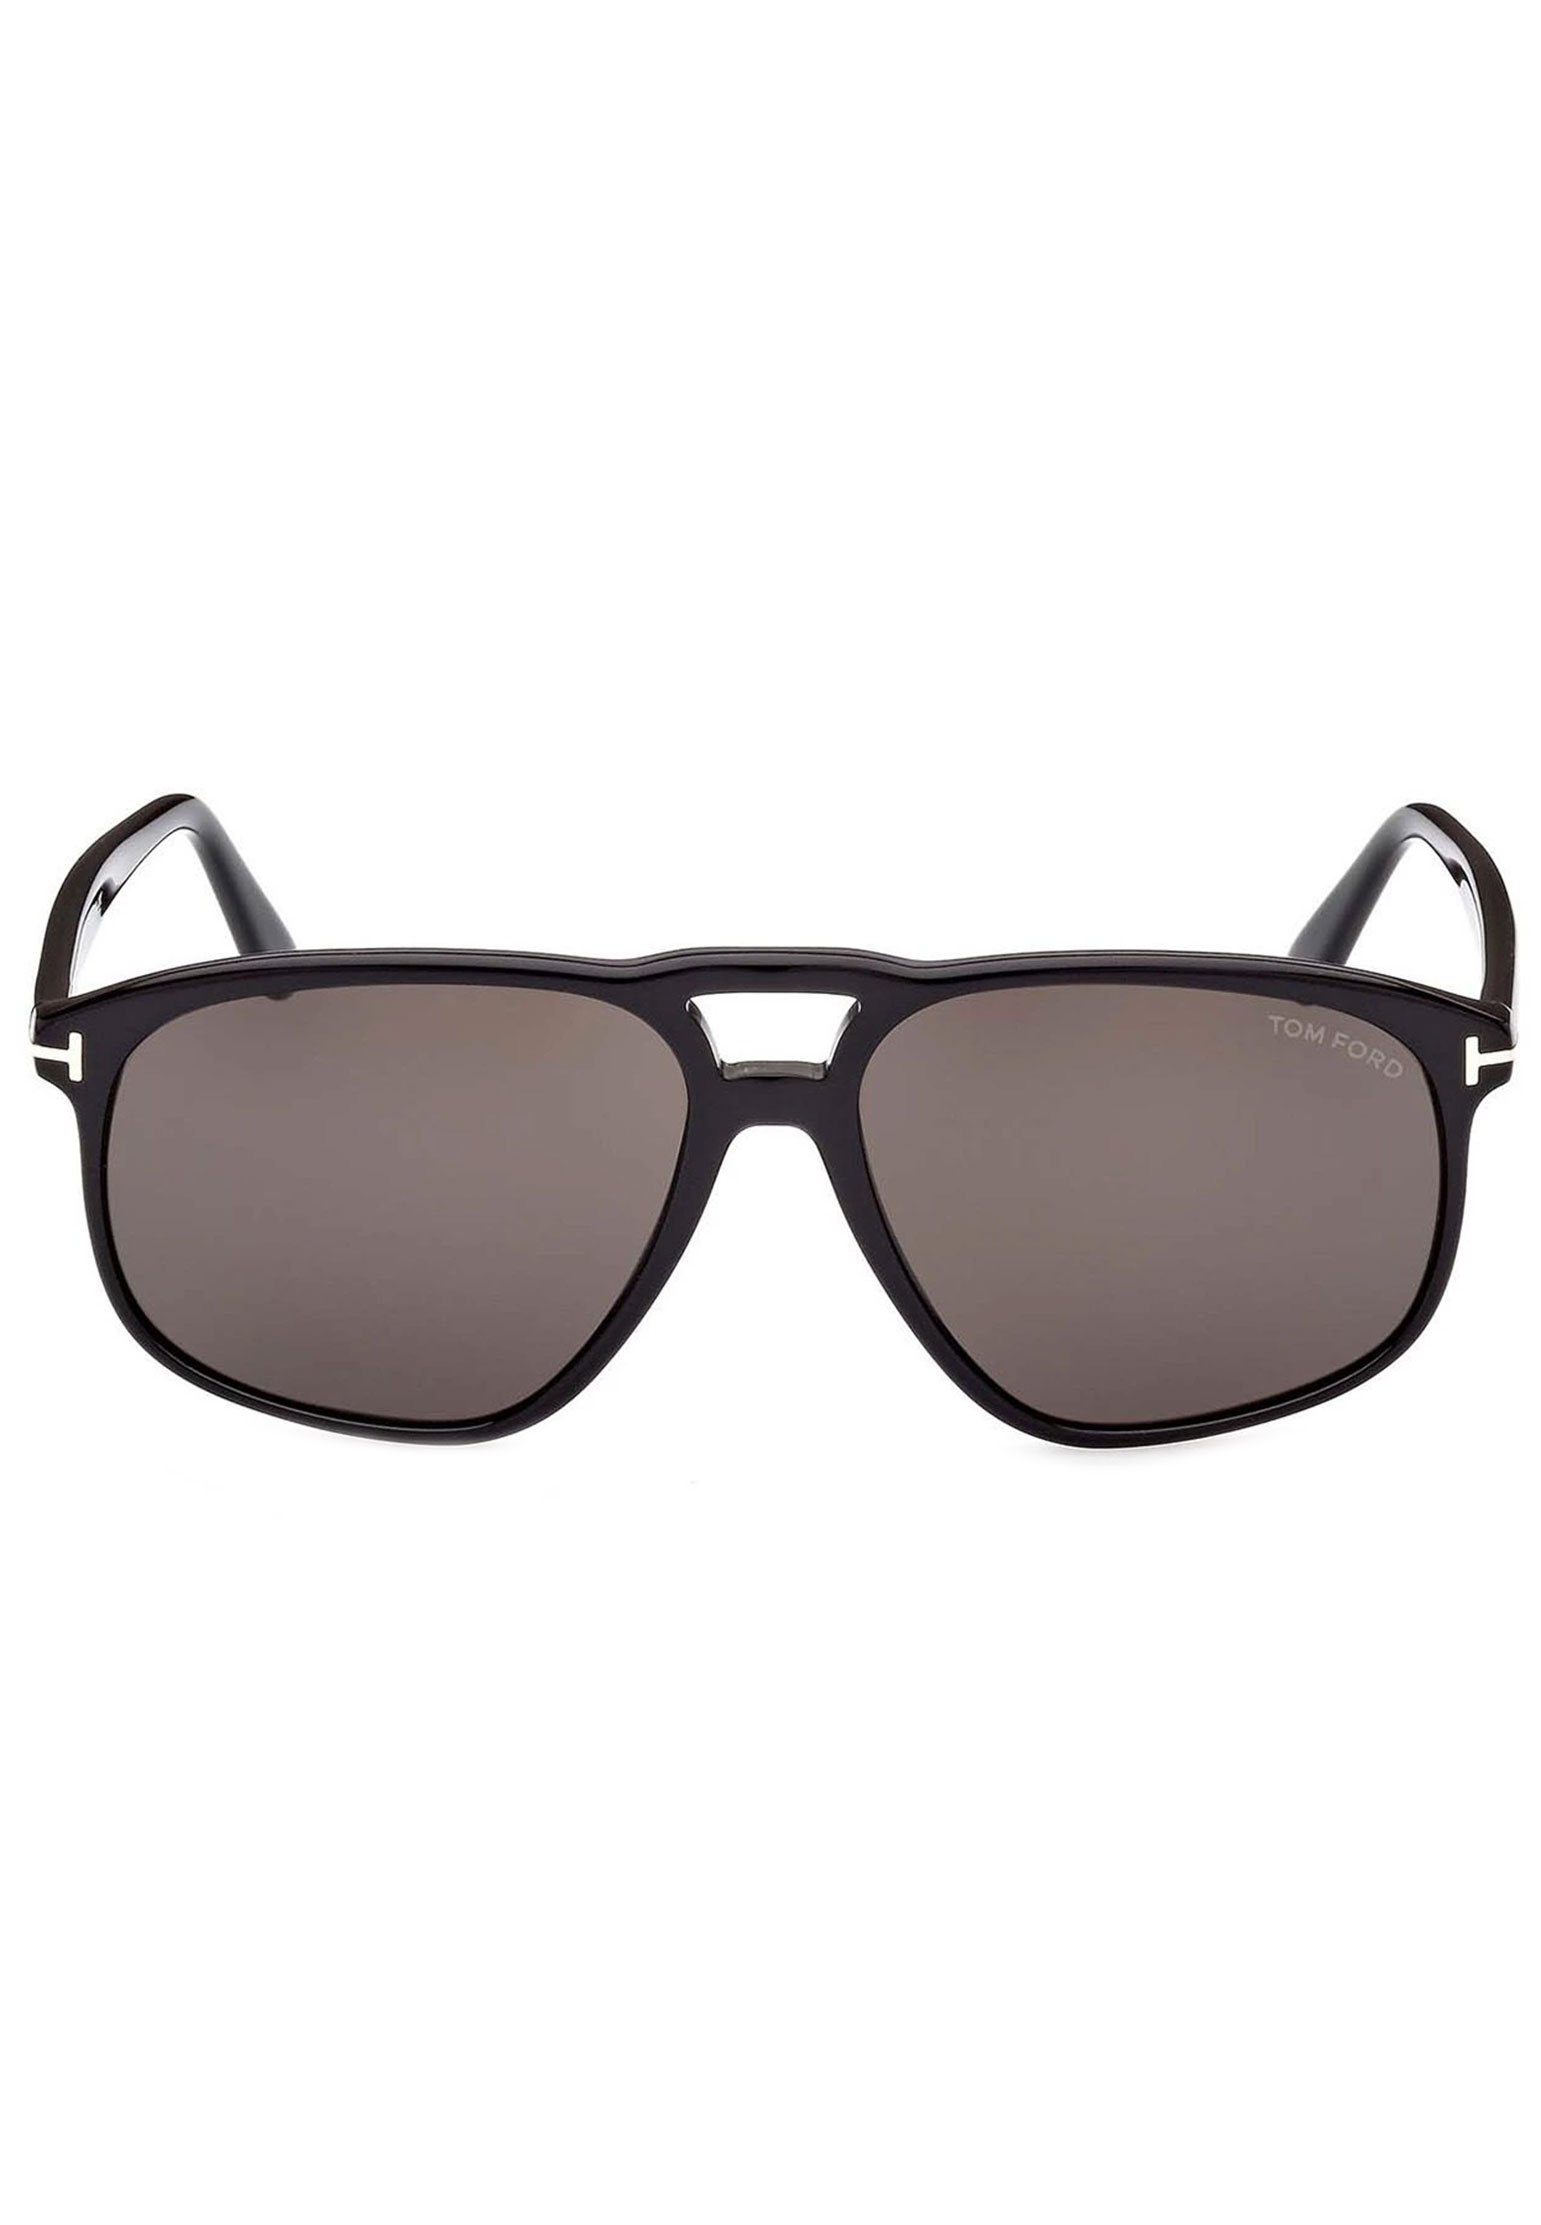 Sunglass TOM FORD Color: black (Code: 1663) in online store Allure